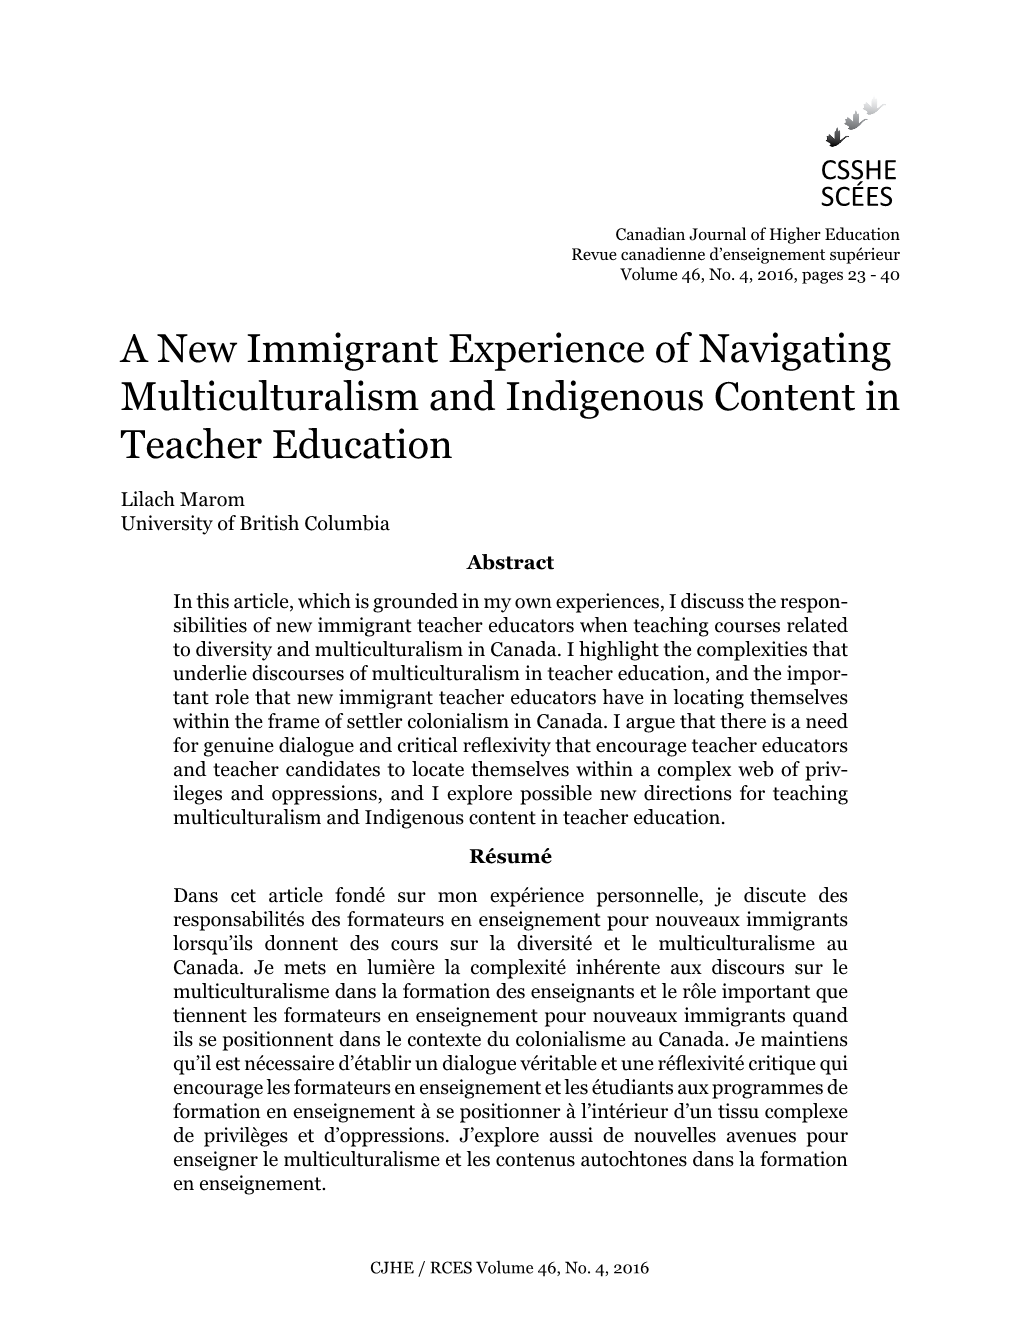 A New Immigrant Experience of Navigating Multiculturalism and Indigenous Content in Teacher Education